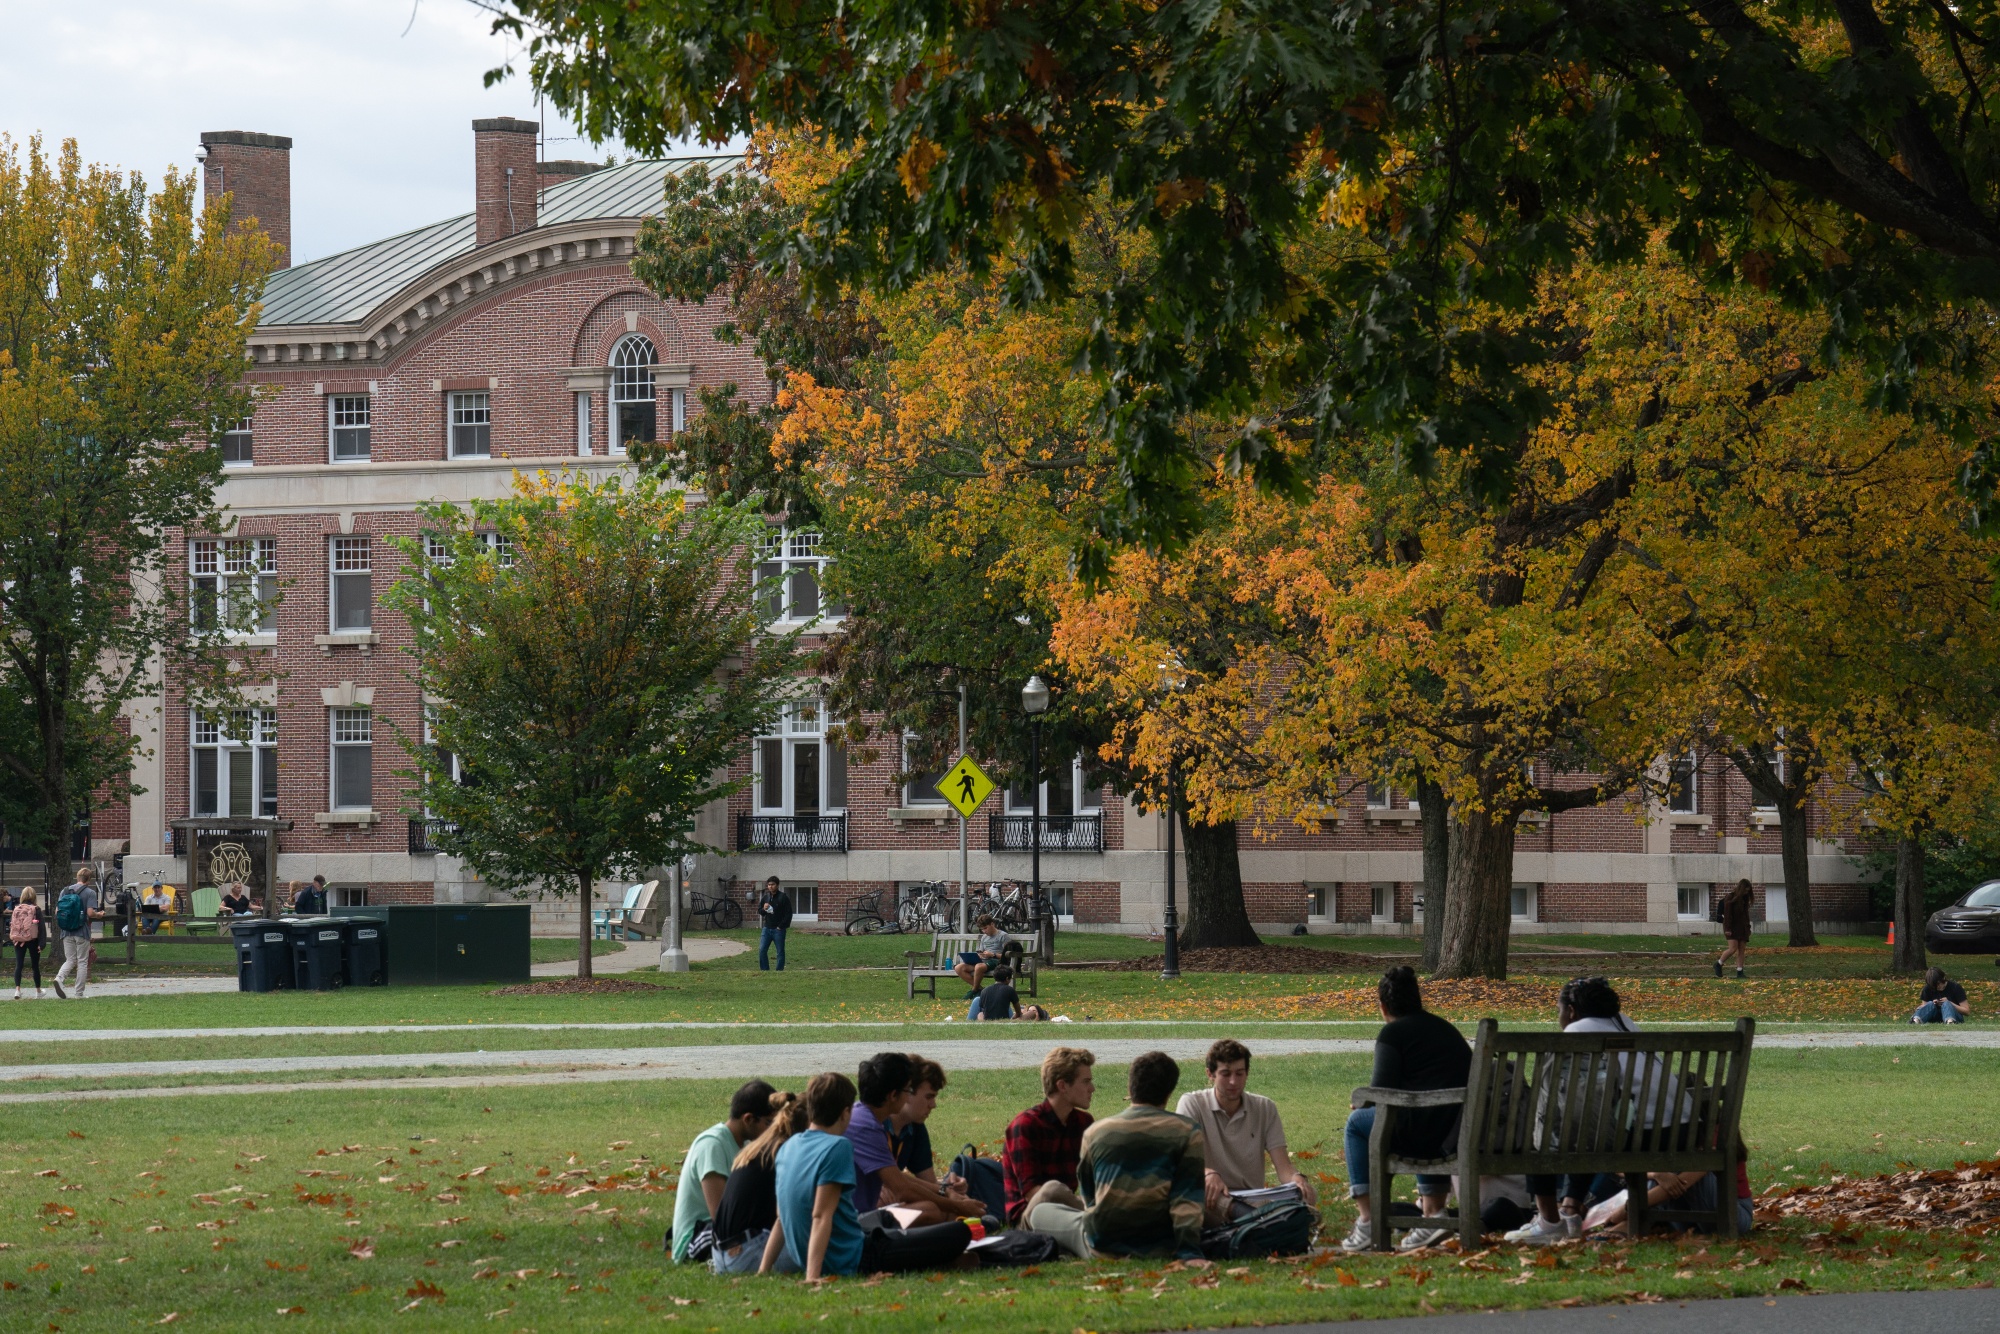 Students have class outdoors on the campus of Dartmouth College in Hanover, New Hampshire.